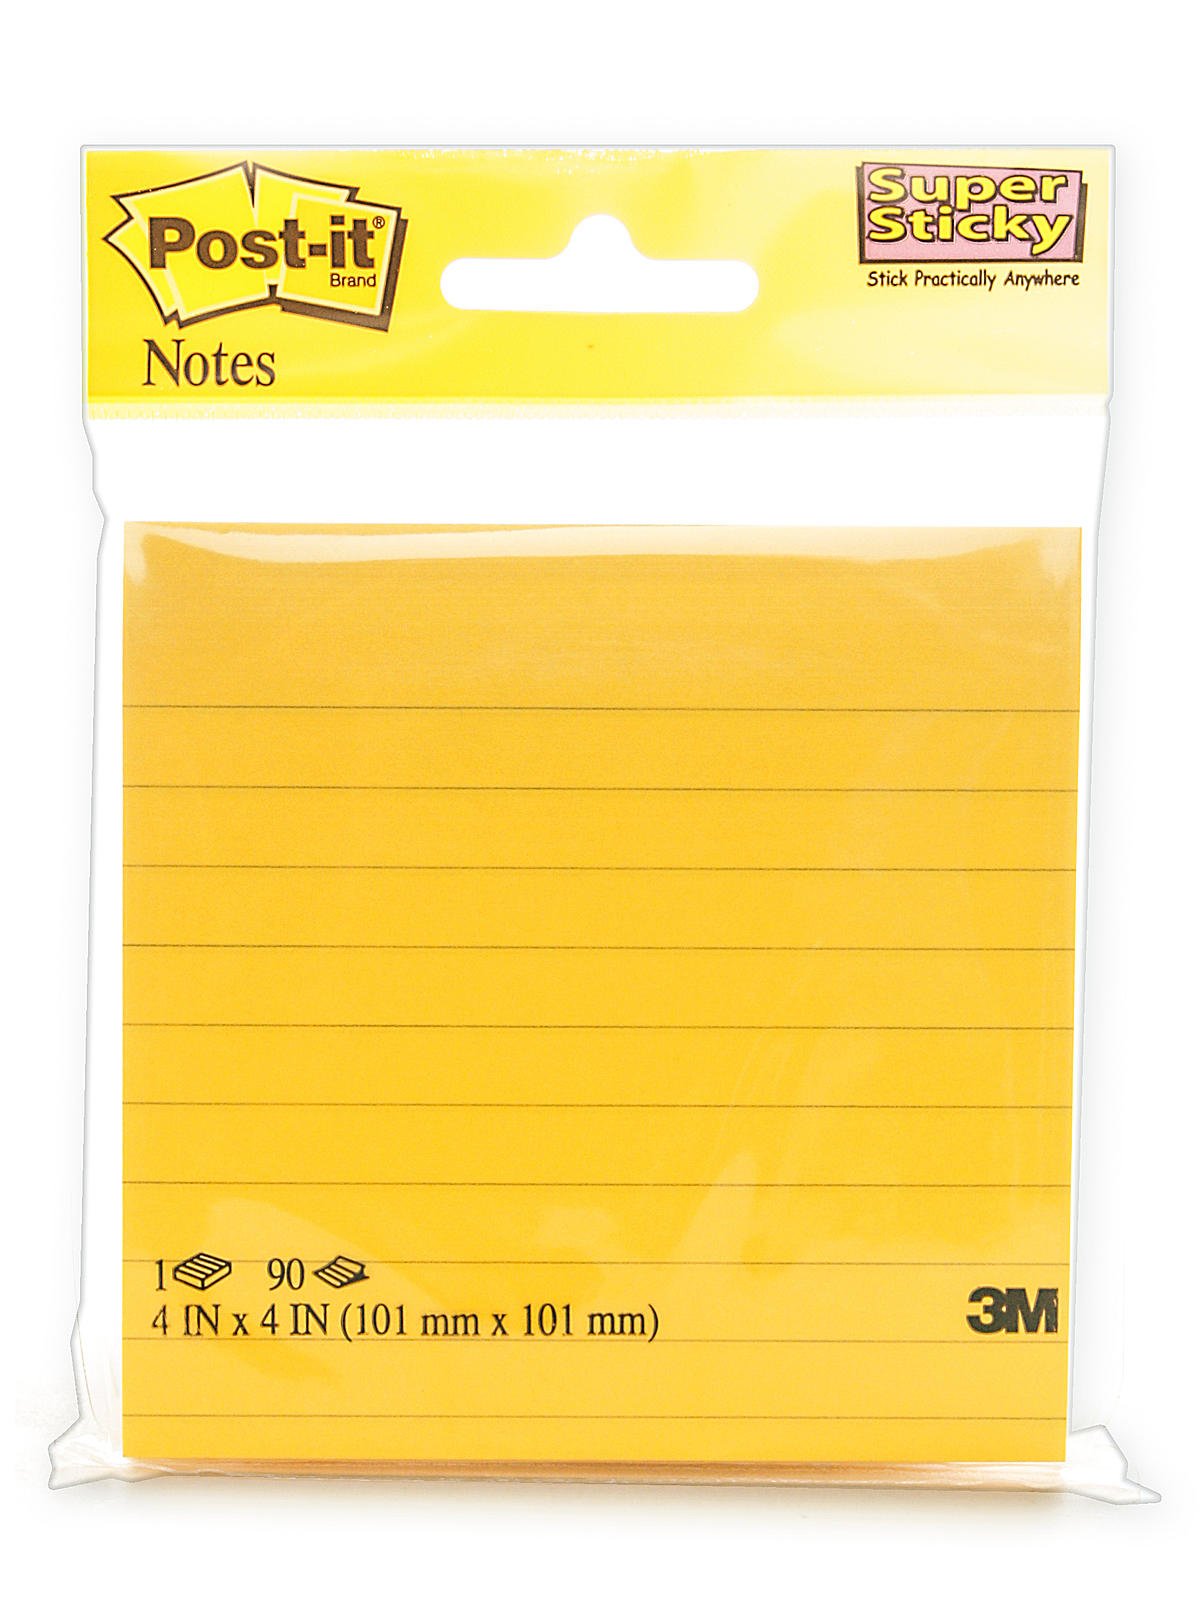 Post-it Super Sticky Notes - Yellow - Shop Sticky Notes & Index